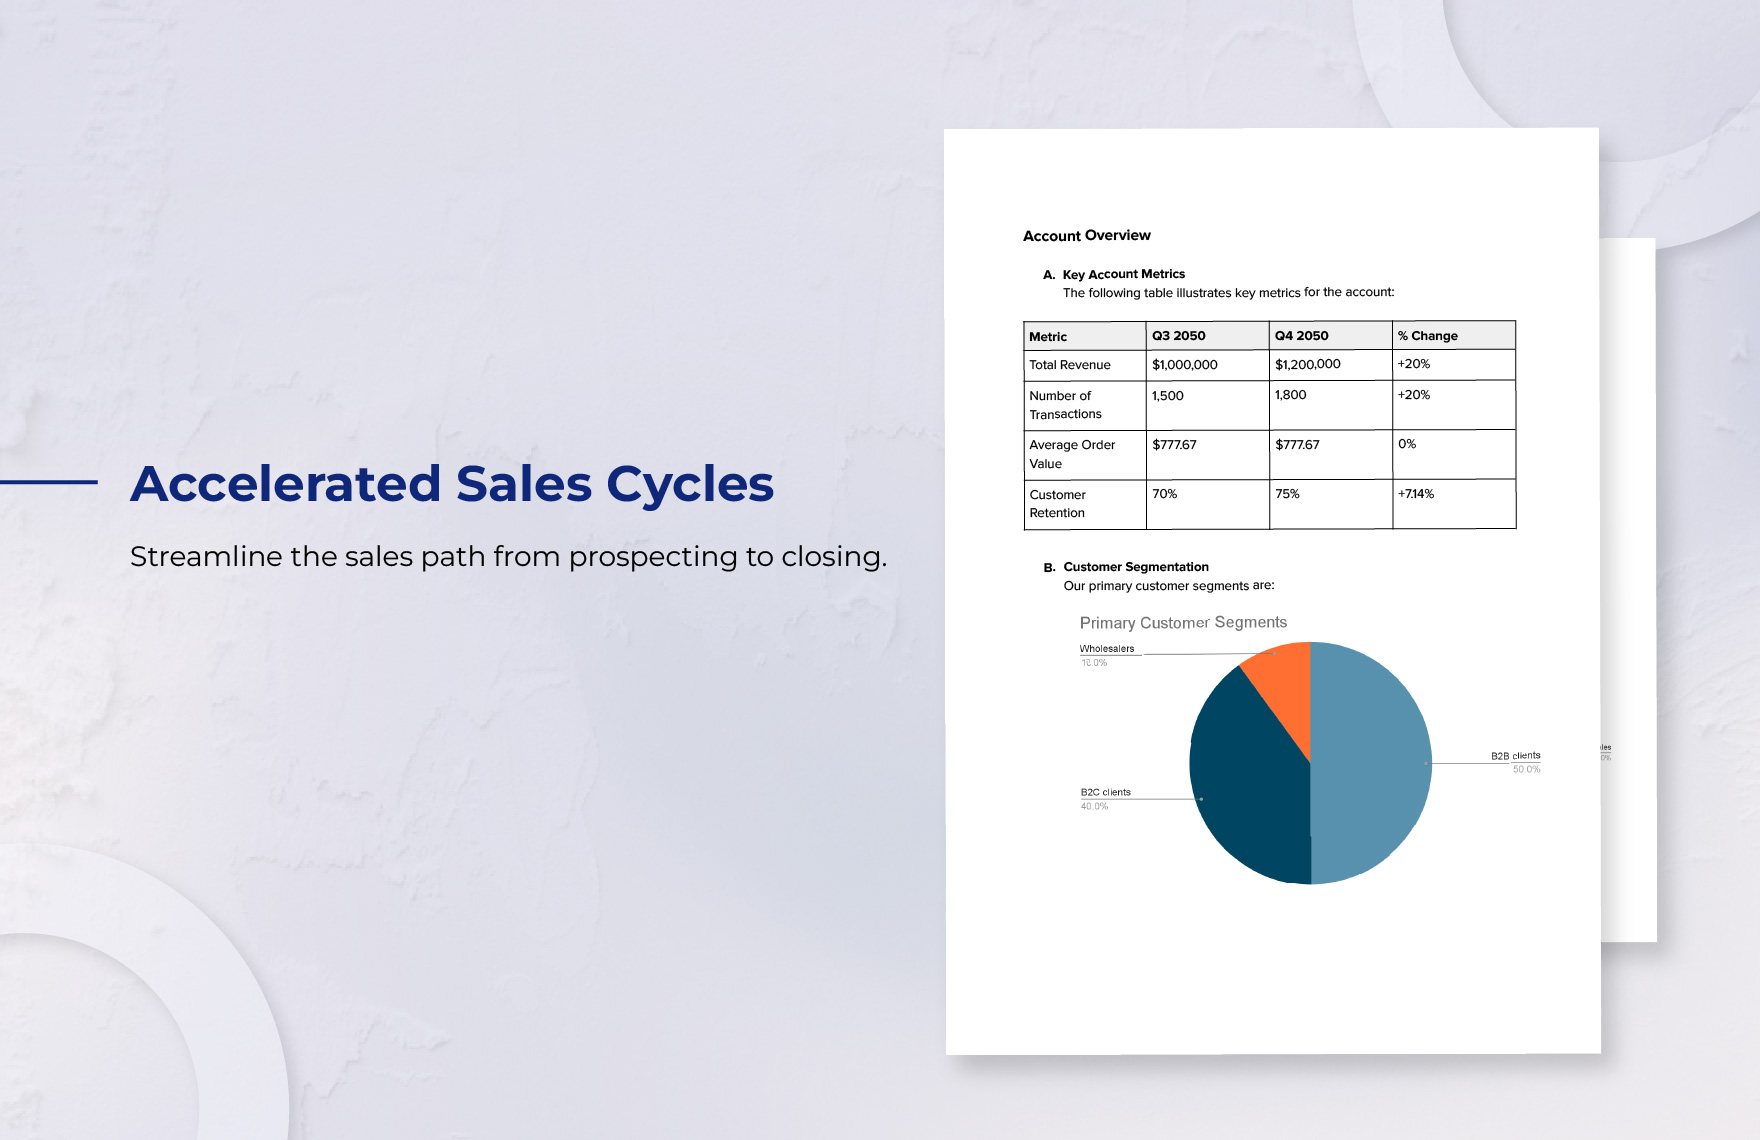 Sales Account Analysis Report Template